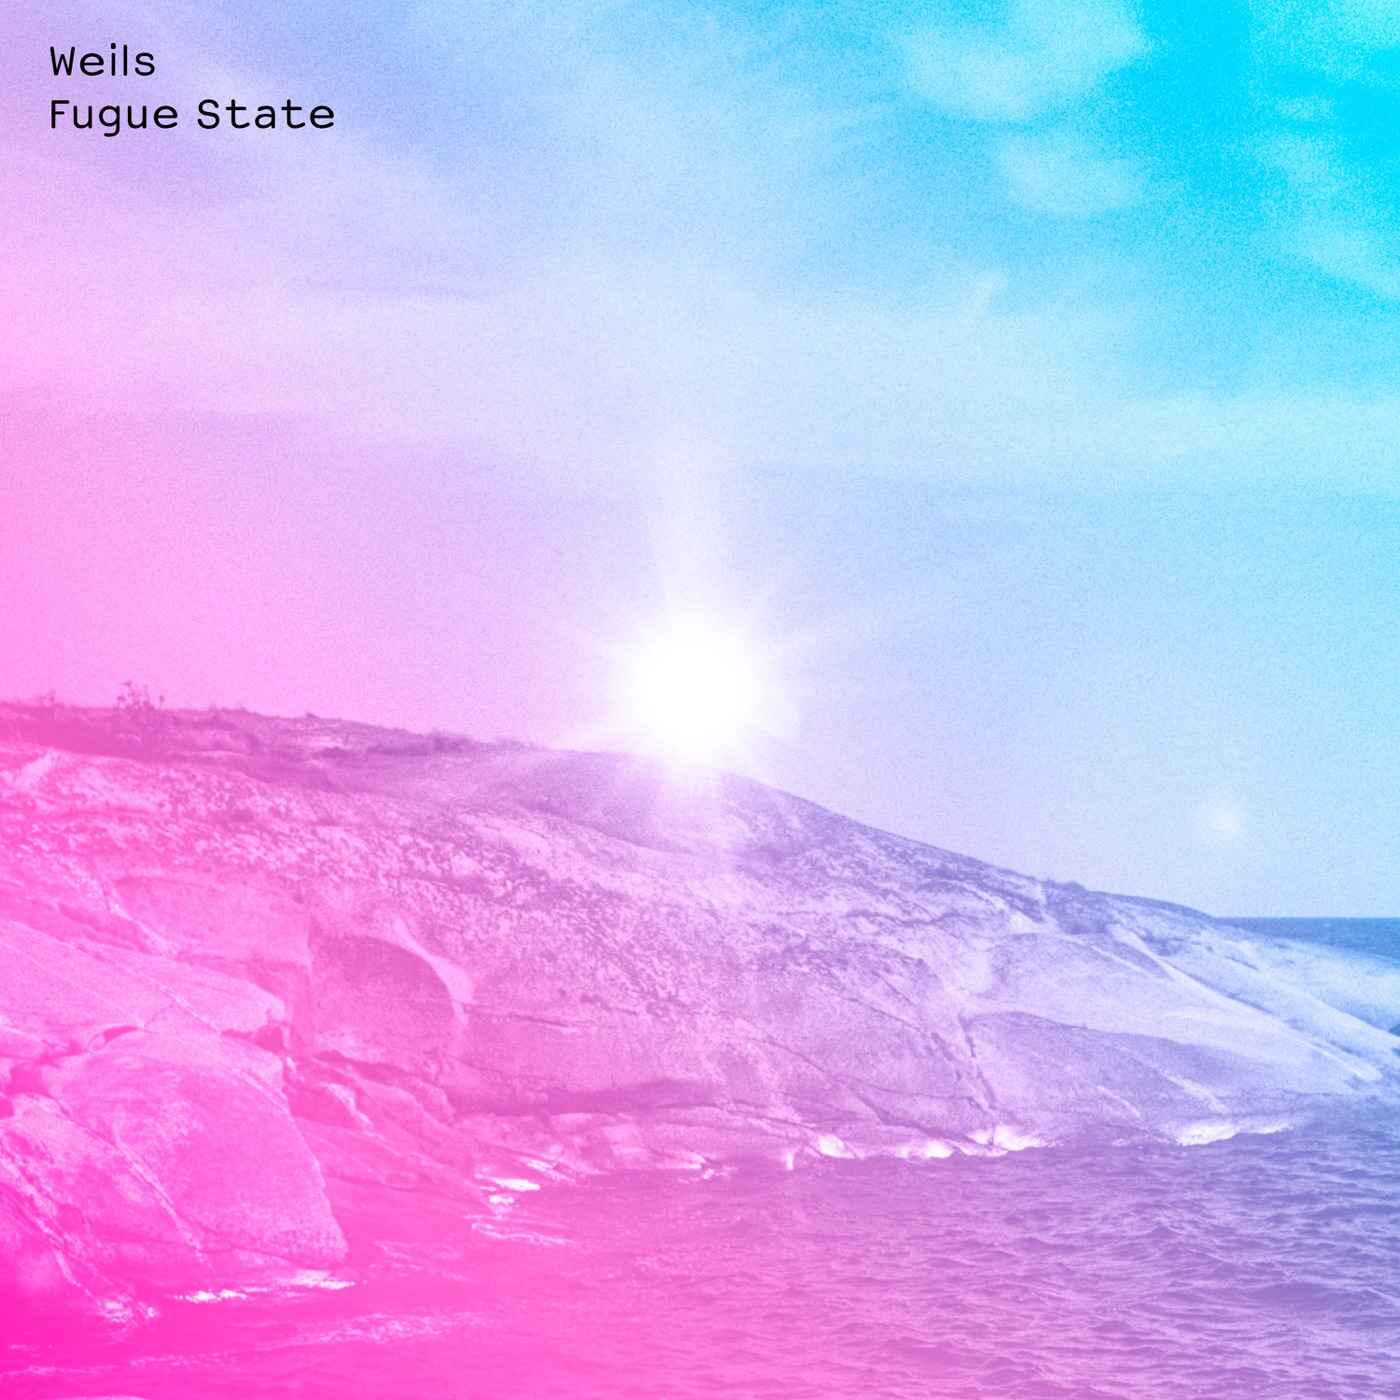 Fugue State by Weils